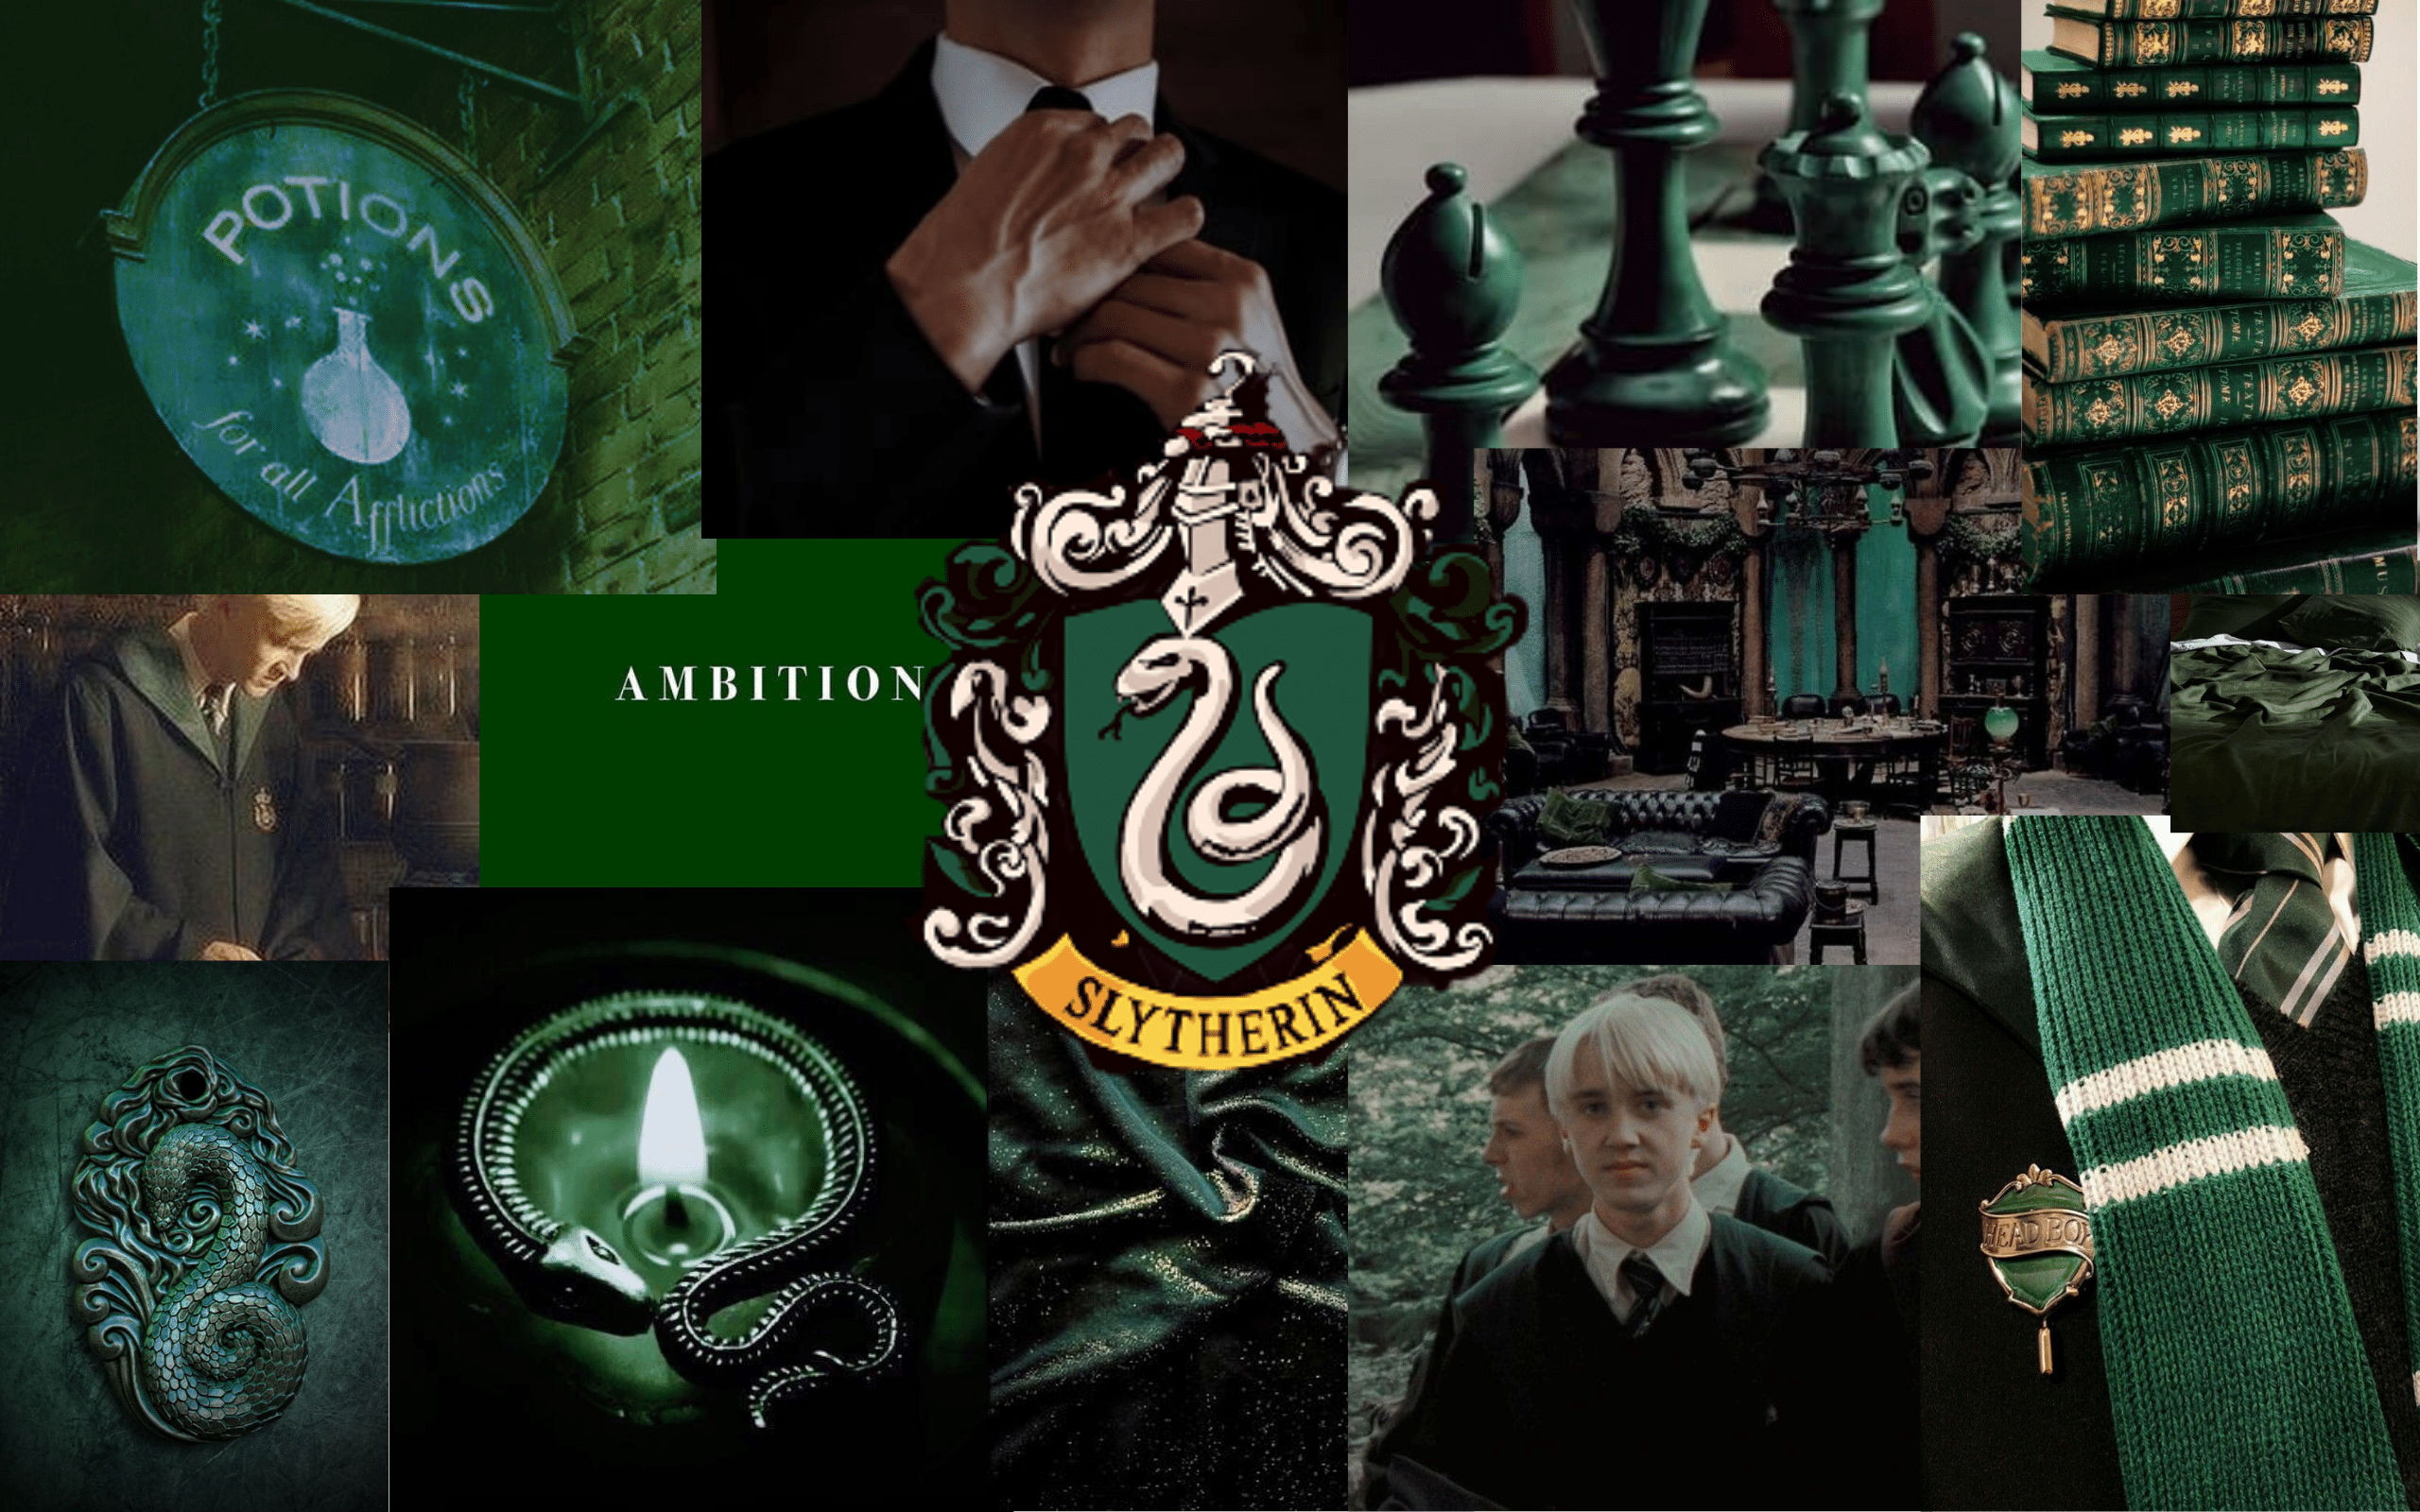 A collage of harry potter images - Slytherin